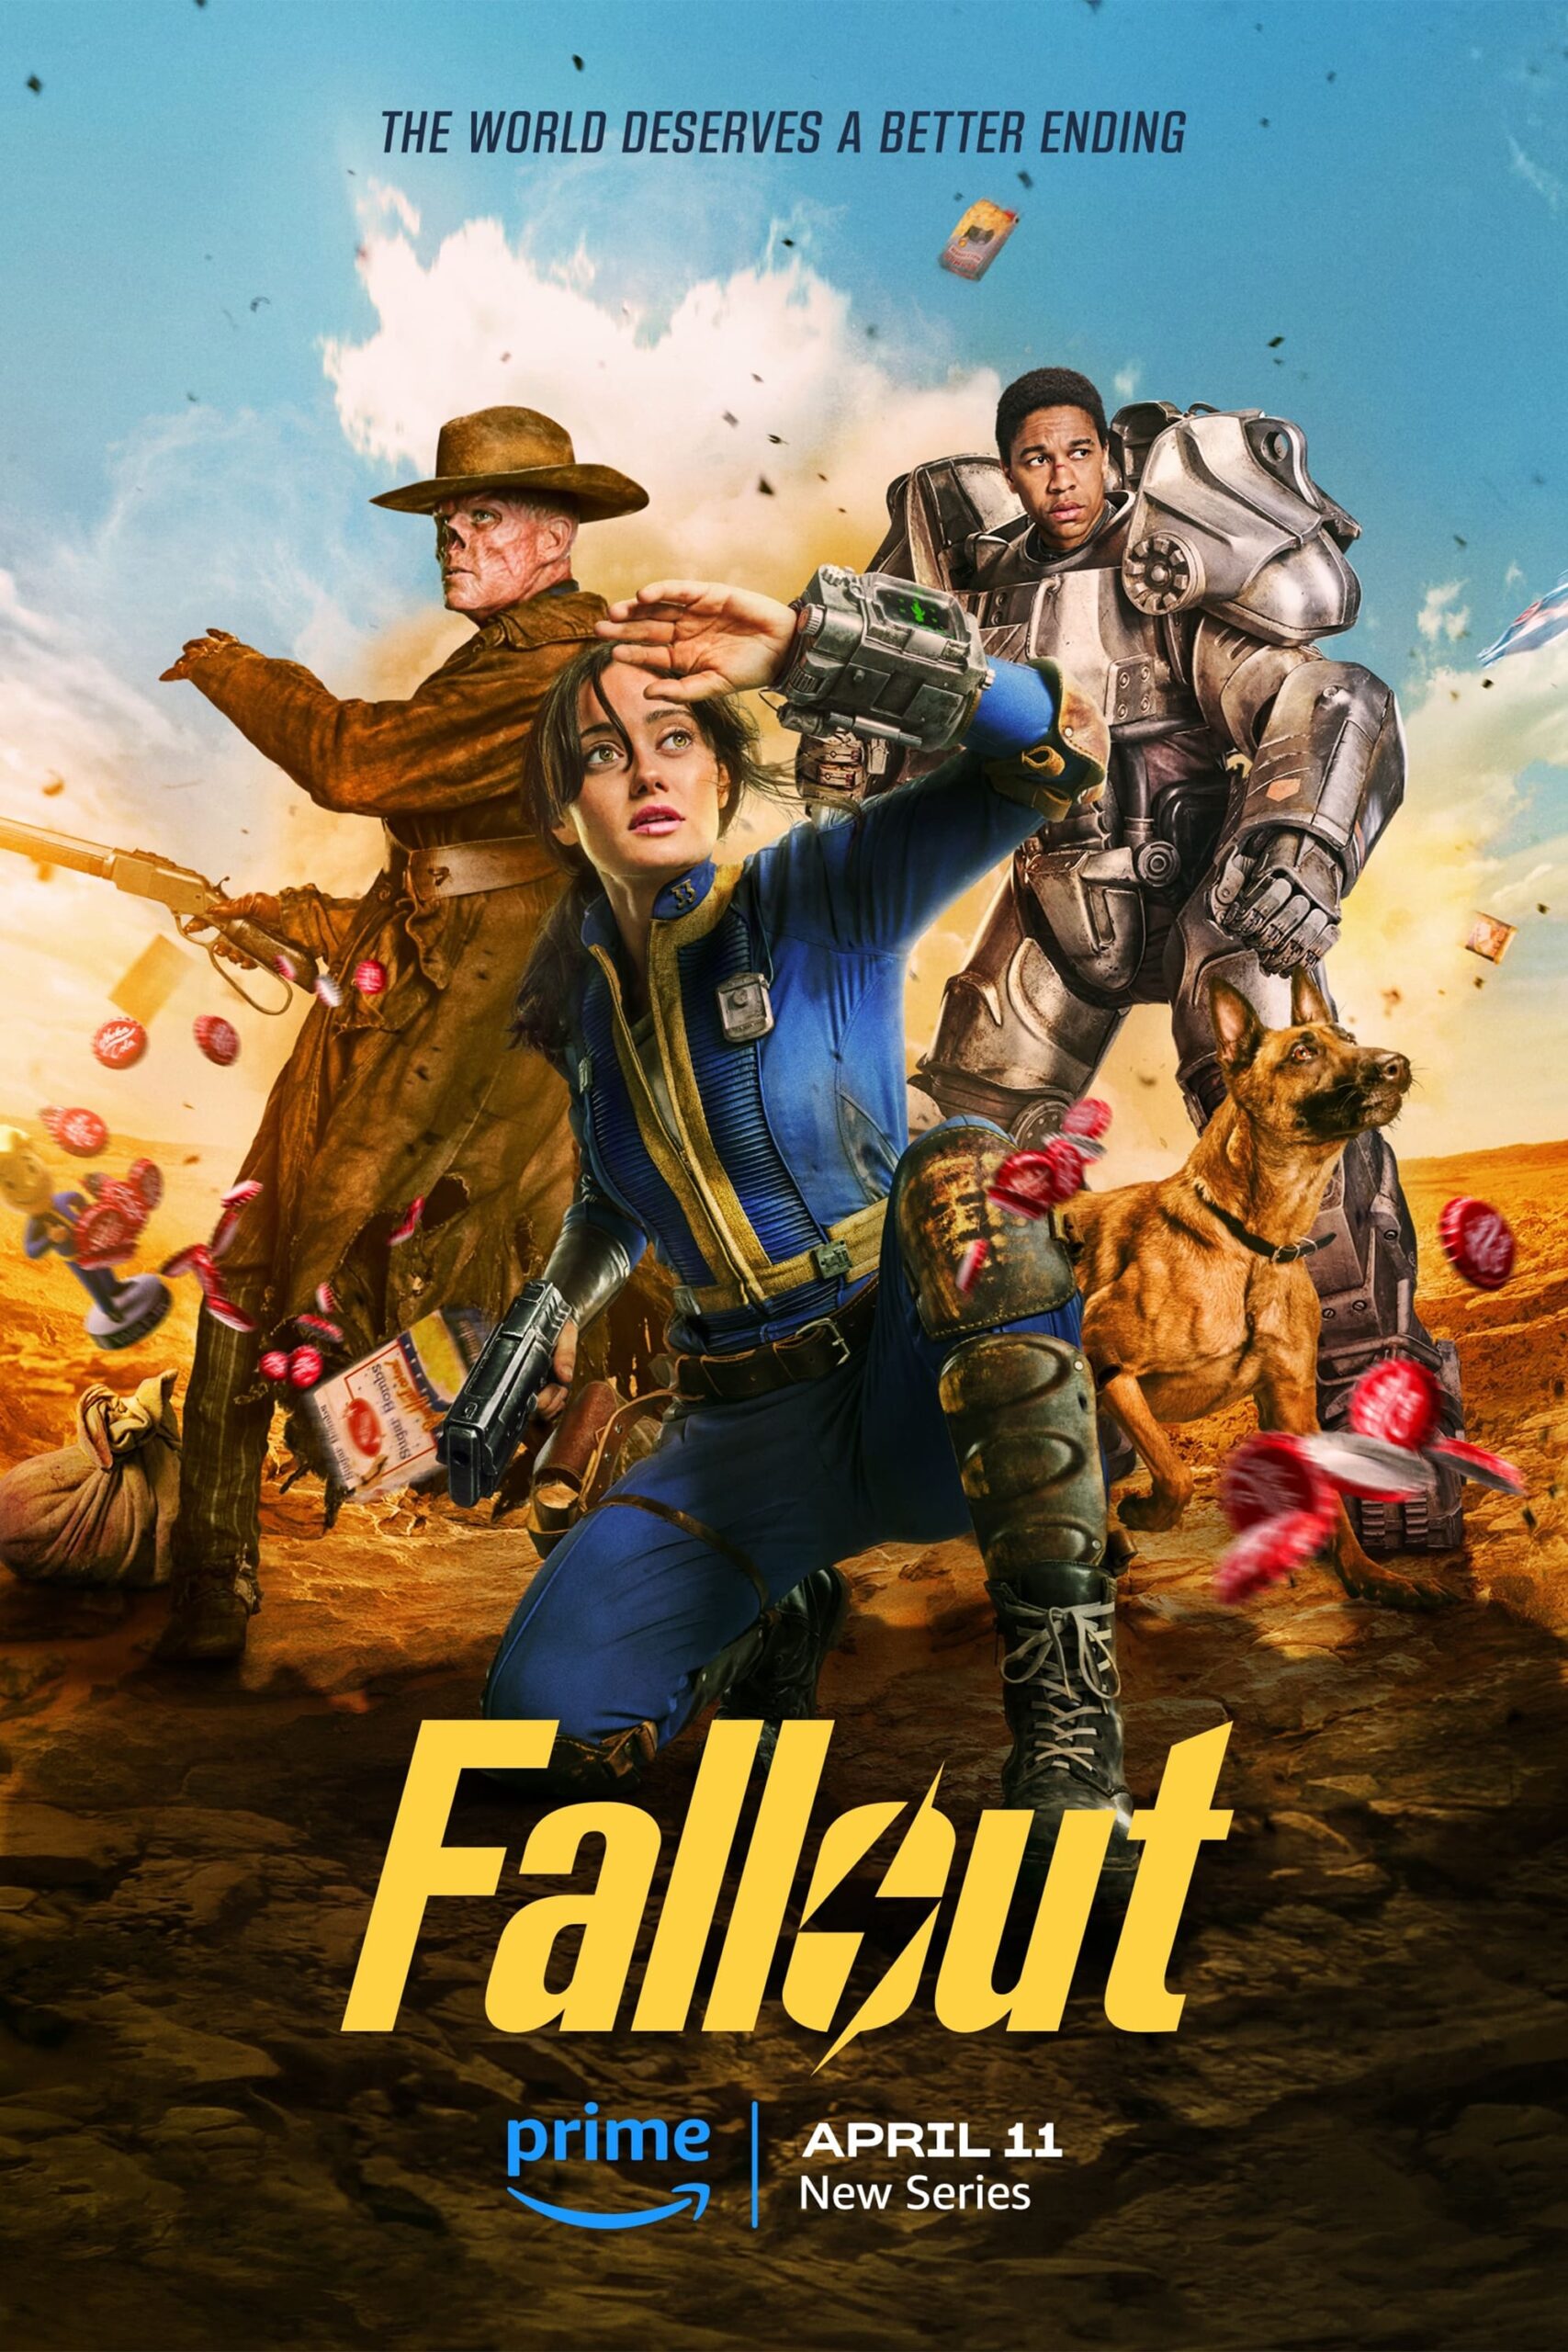 'Okay…I Love Fallout Amazon Prime Series—Episode 1: The End Review’